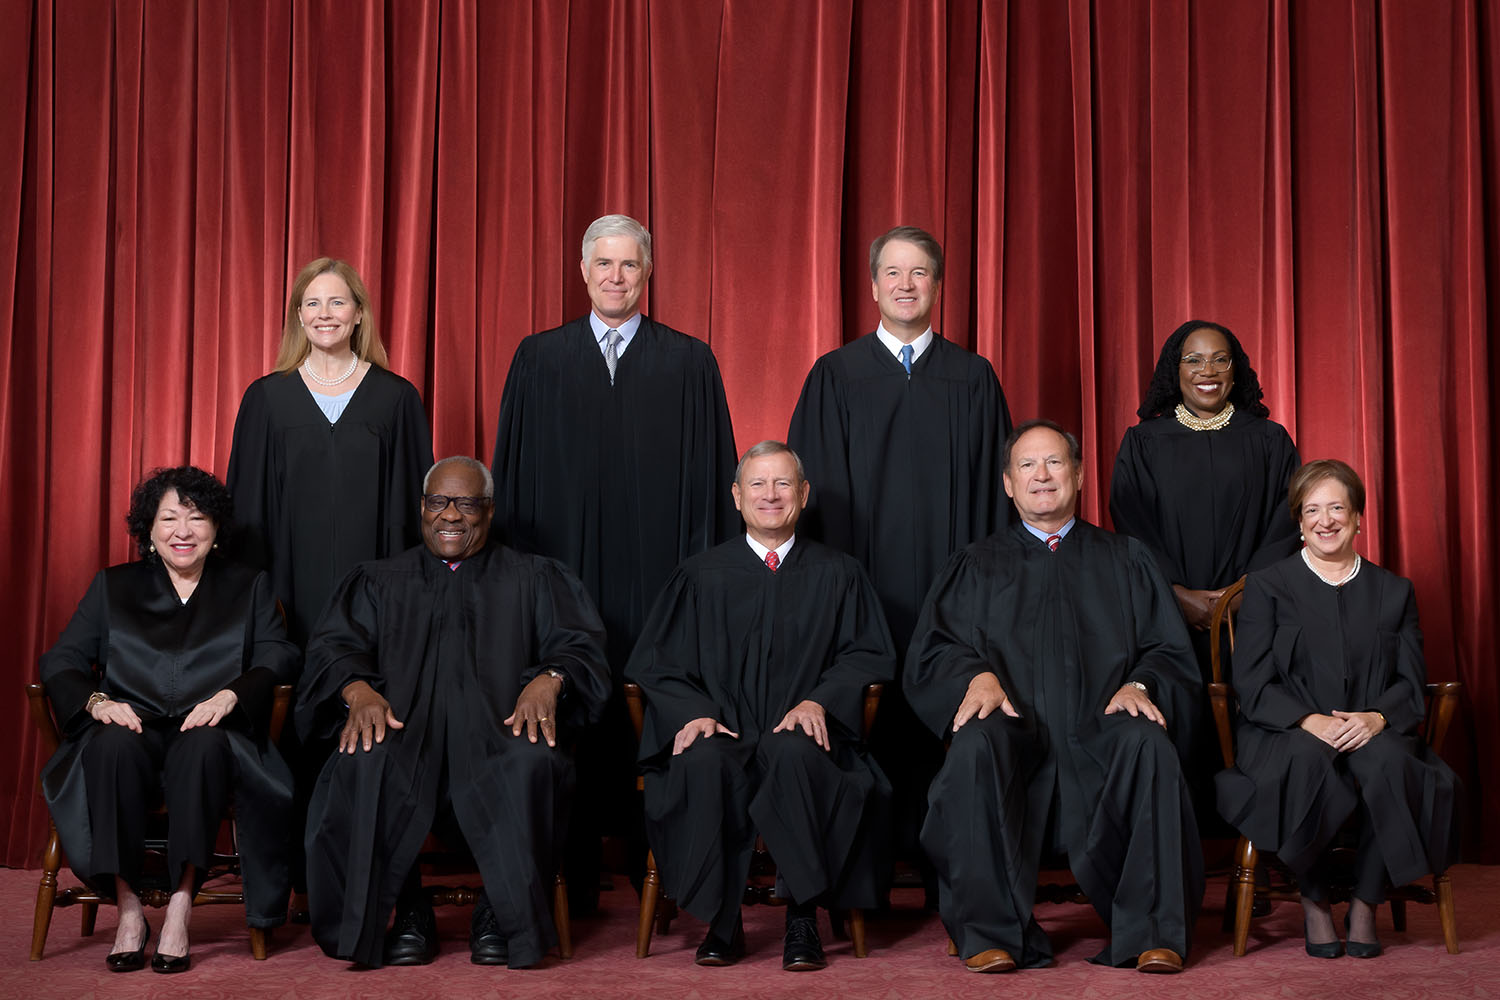 Justices of the Supreme Court as of June 2022. Front row (left to right): Sonia Sotomayor, Clarence Thomas, Chief Justice John Roberts, Samuel Alito, and Elena Kagan. Back row (left to right): Amy Coney Barrett, Neil Gorsuch, Brett Kavanaugh, and Ketanji Brown Jackson.